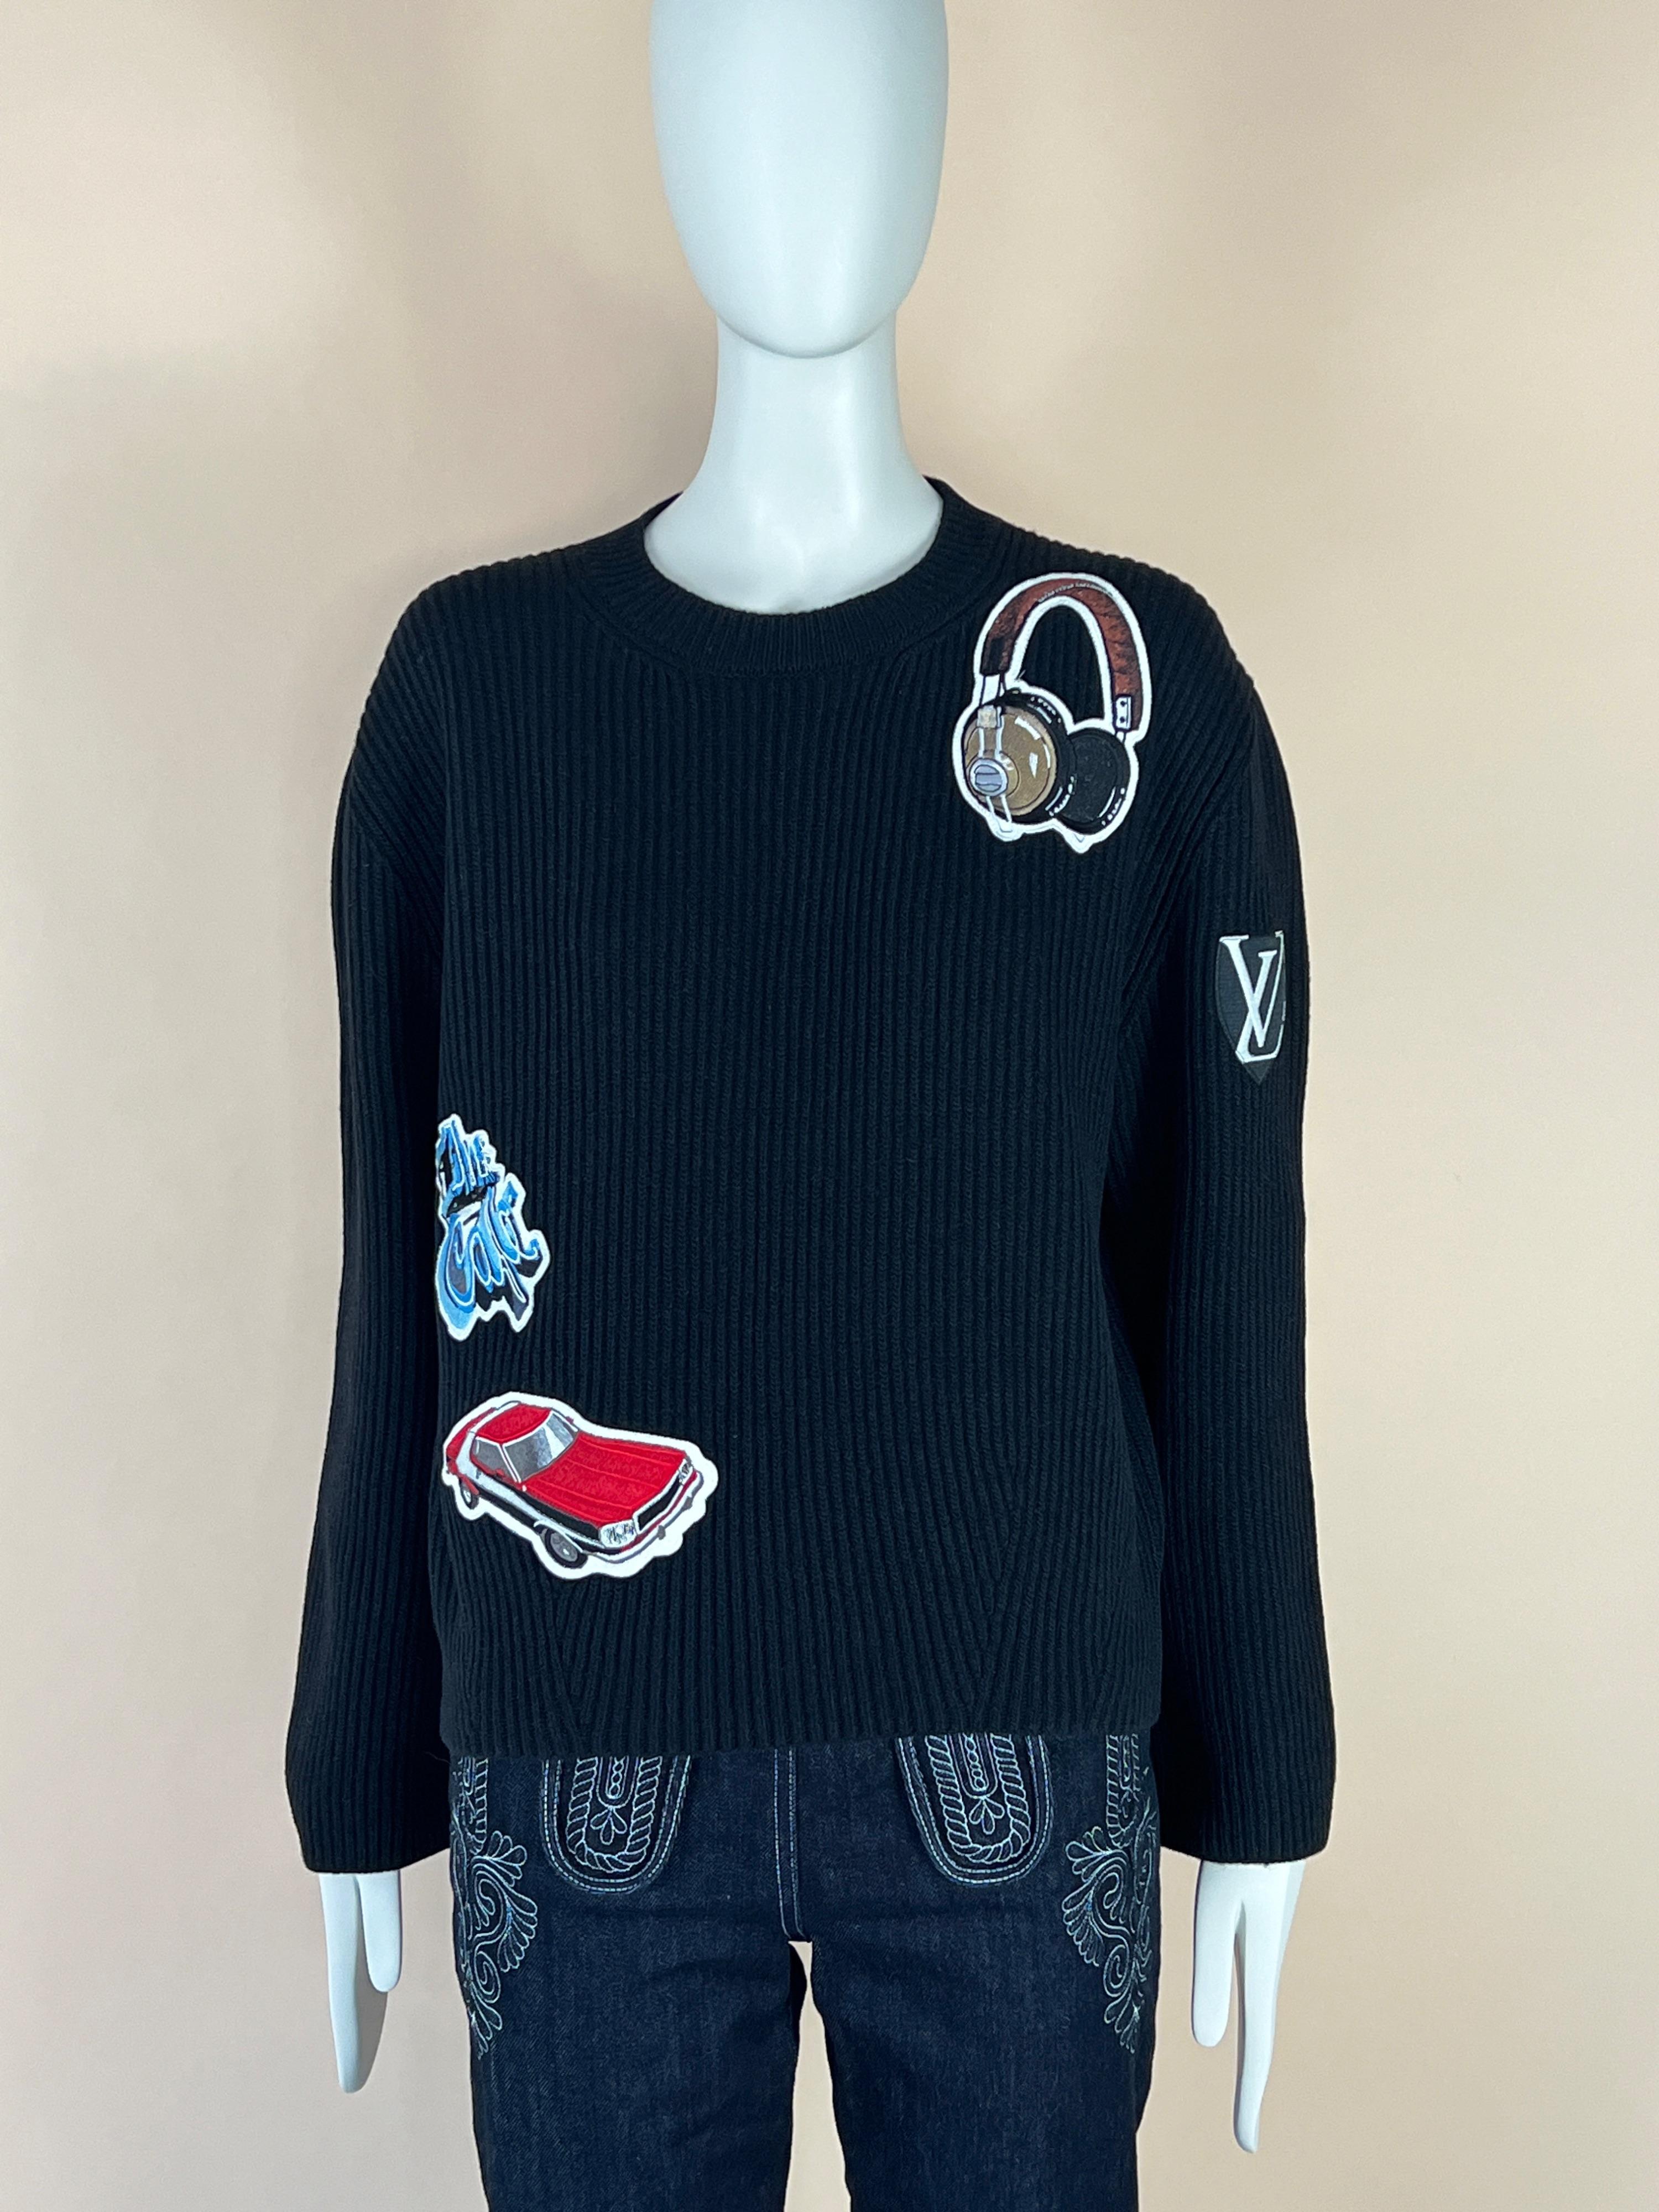 Rare, collectors Louis Vuittons ribbed pullover with LV logo at sleeve and retro style-inspired embroidered patches. 
Made of cashmere and wool blend - super soft! Size mark S.